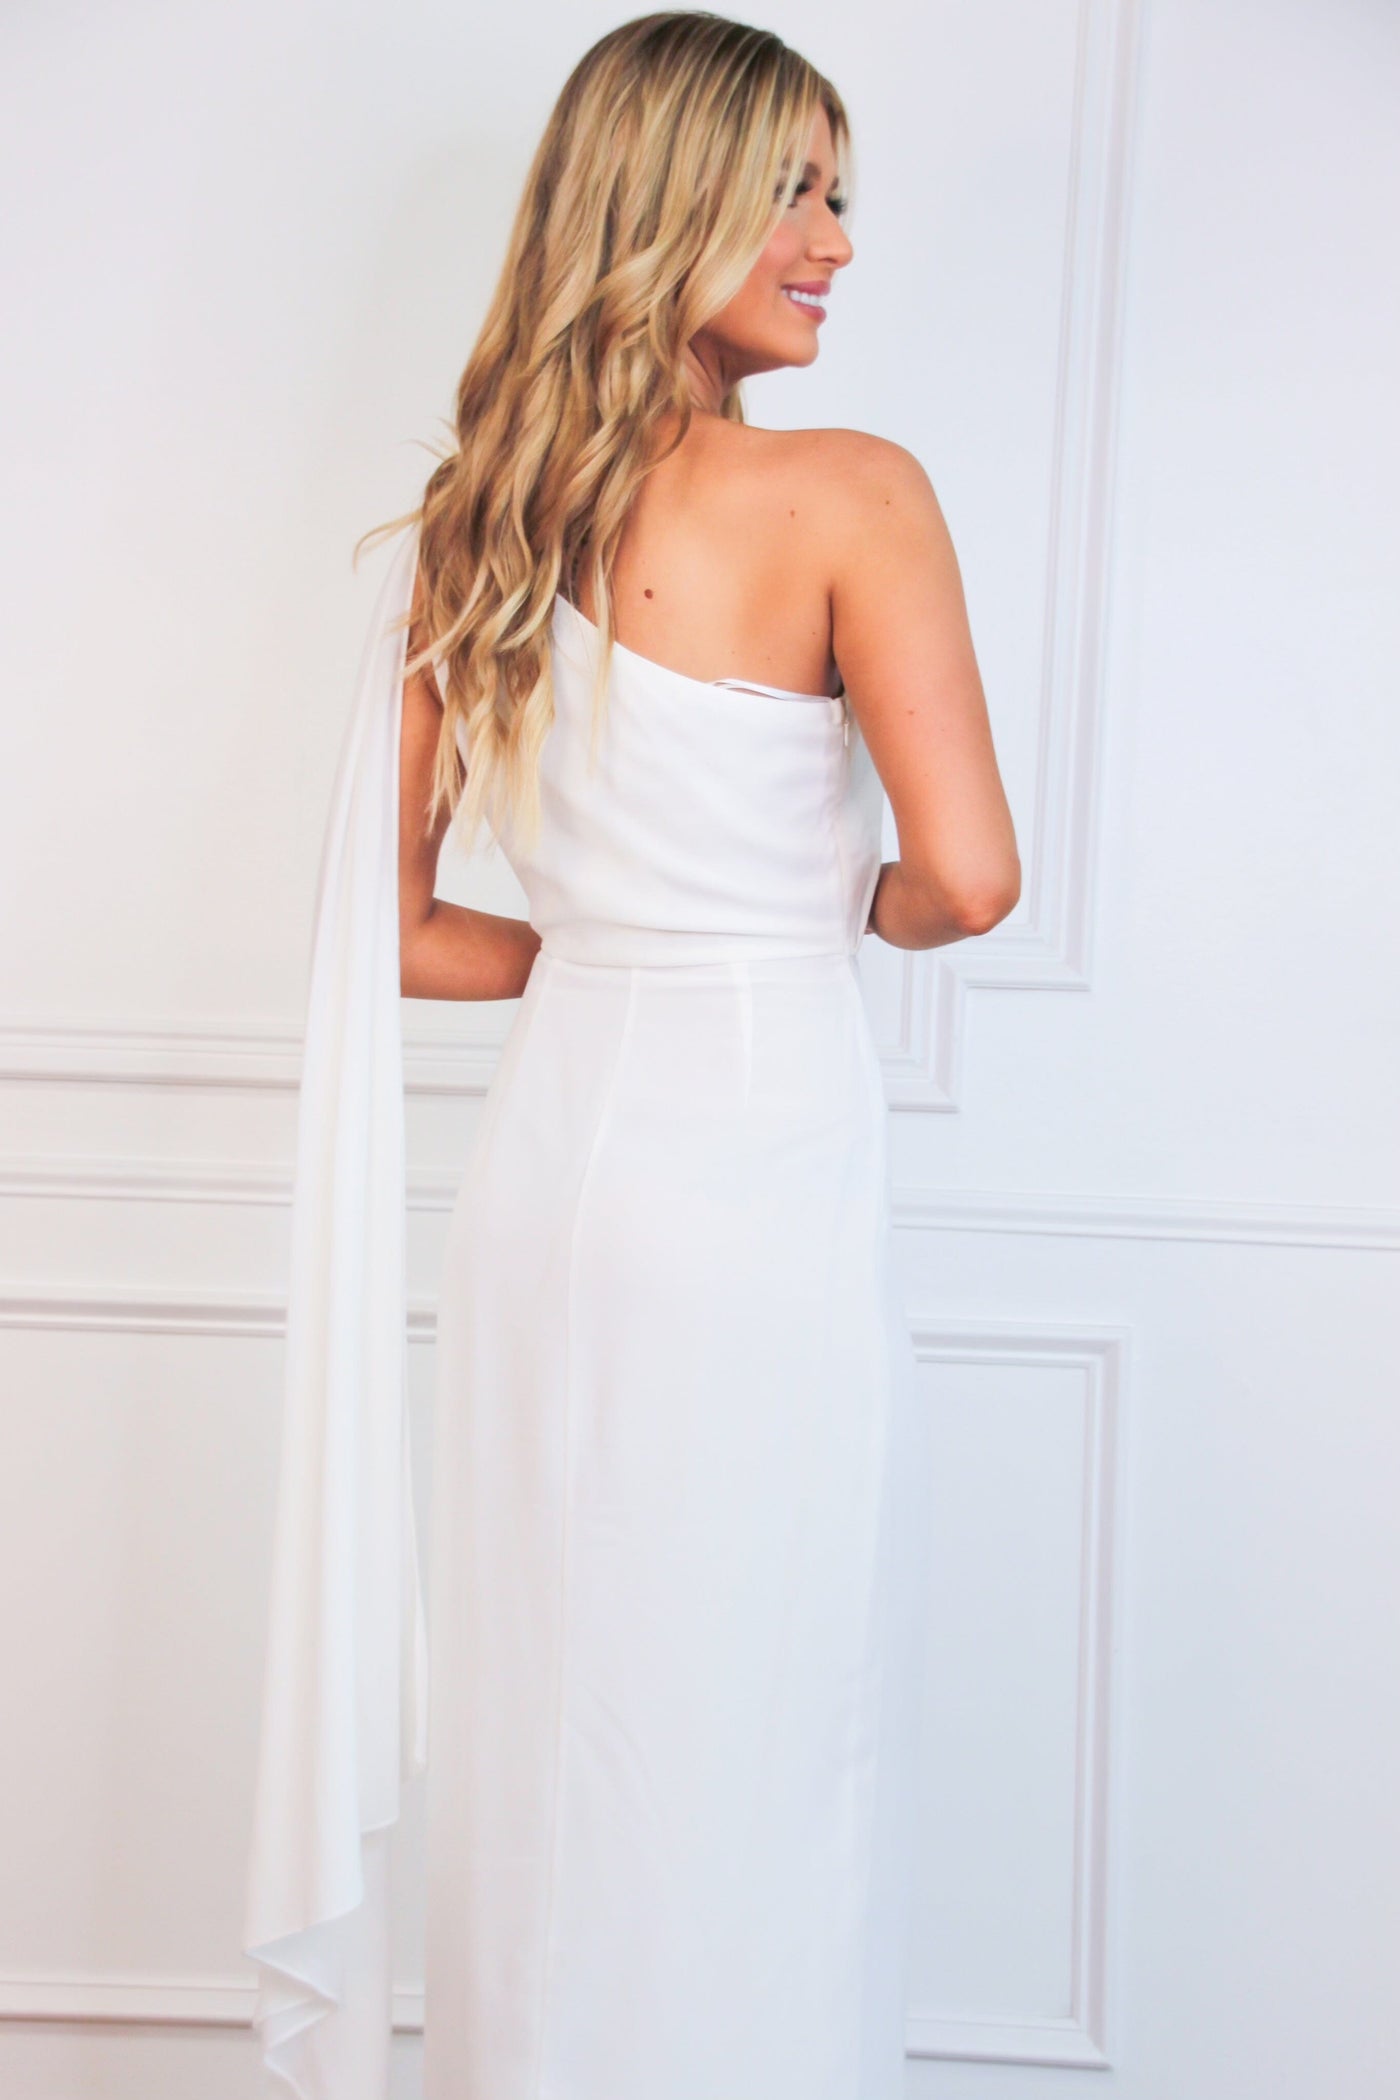 Athena One Shoulder Cape Sleeve Maxi Dress: White - Bella and Bloom Boutique